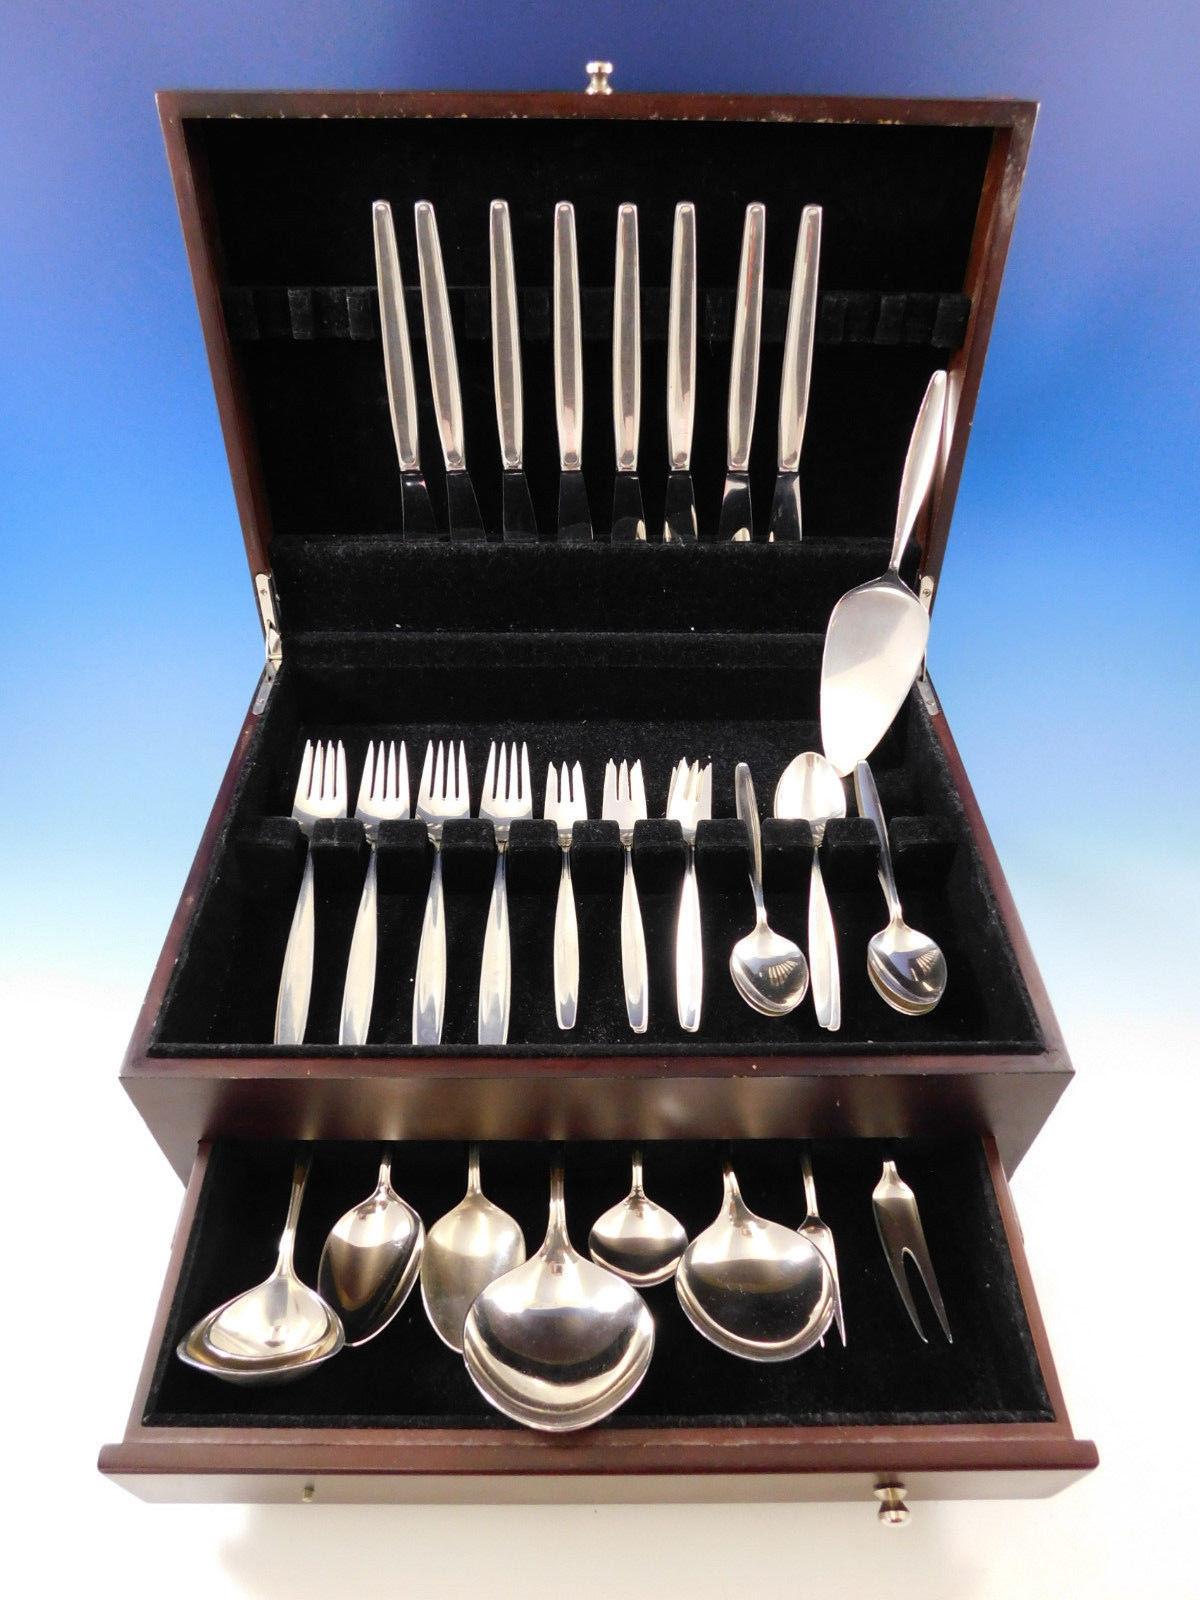 Exquisite dinner size cypress by Georg Jensen Mid-Century Modern sterling silver flatware set of 42 pieces. This set includes:

8 dinner knives, 8 3/4